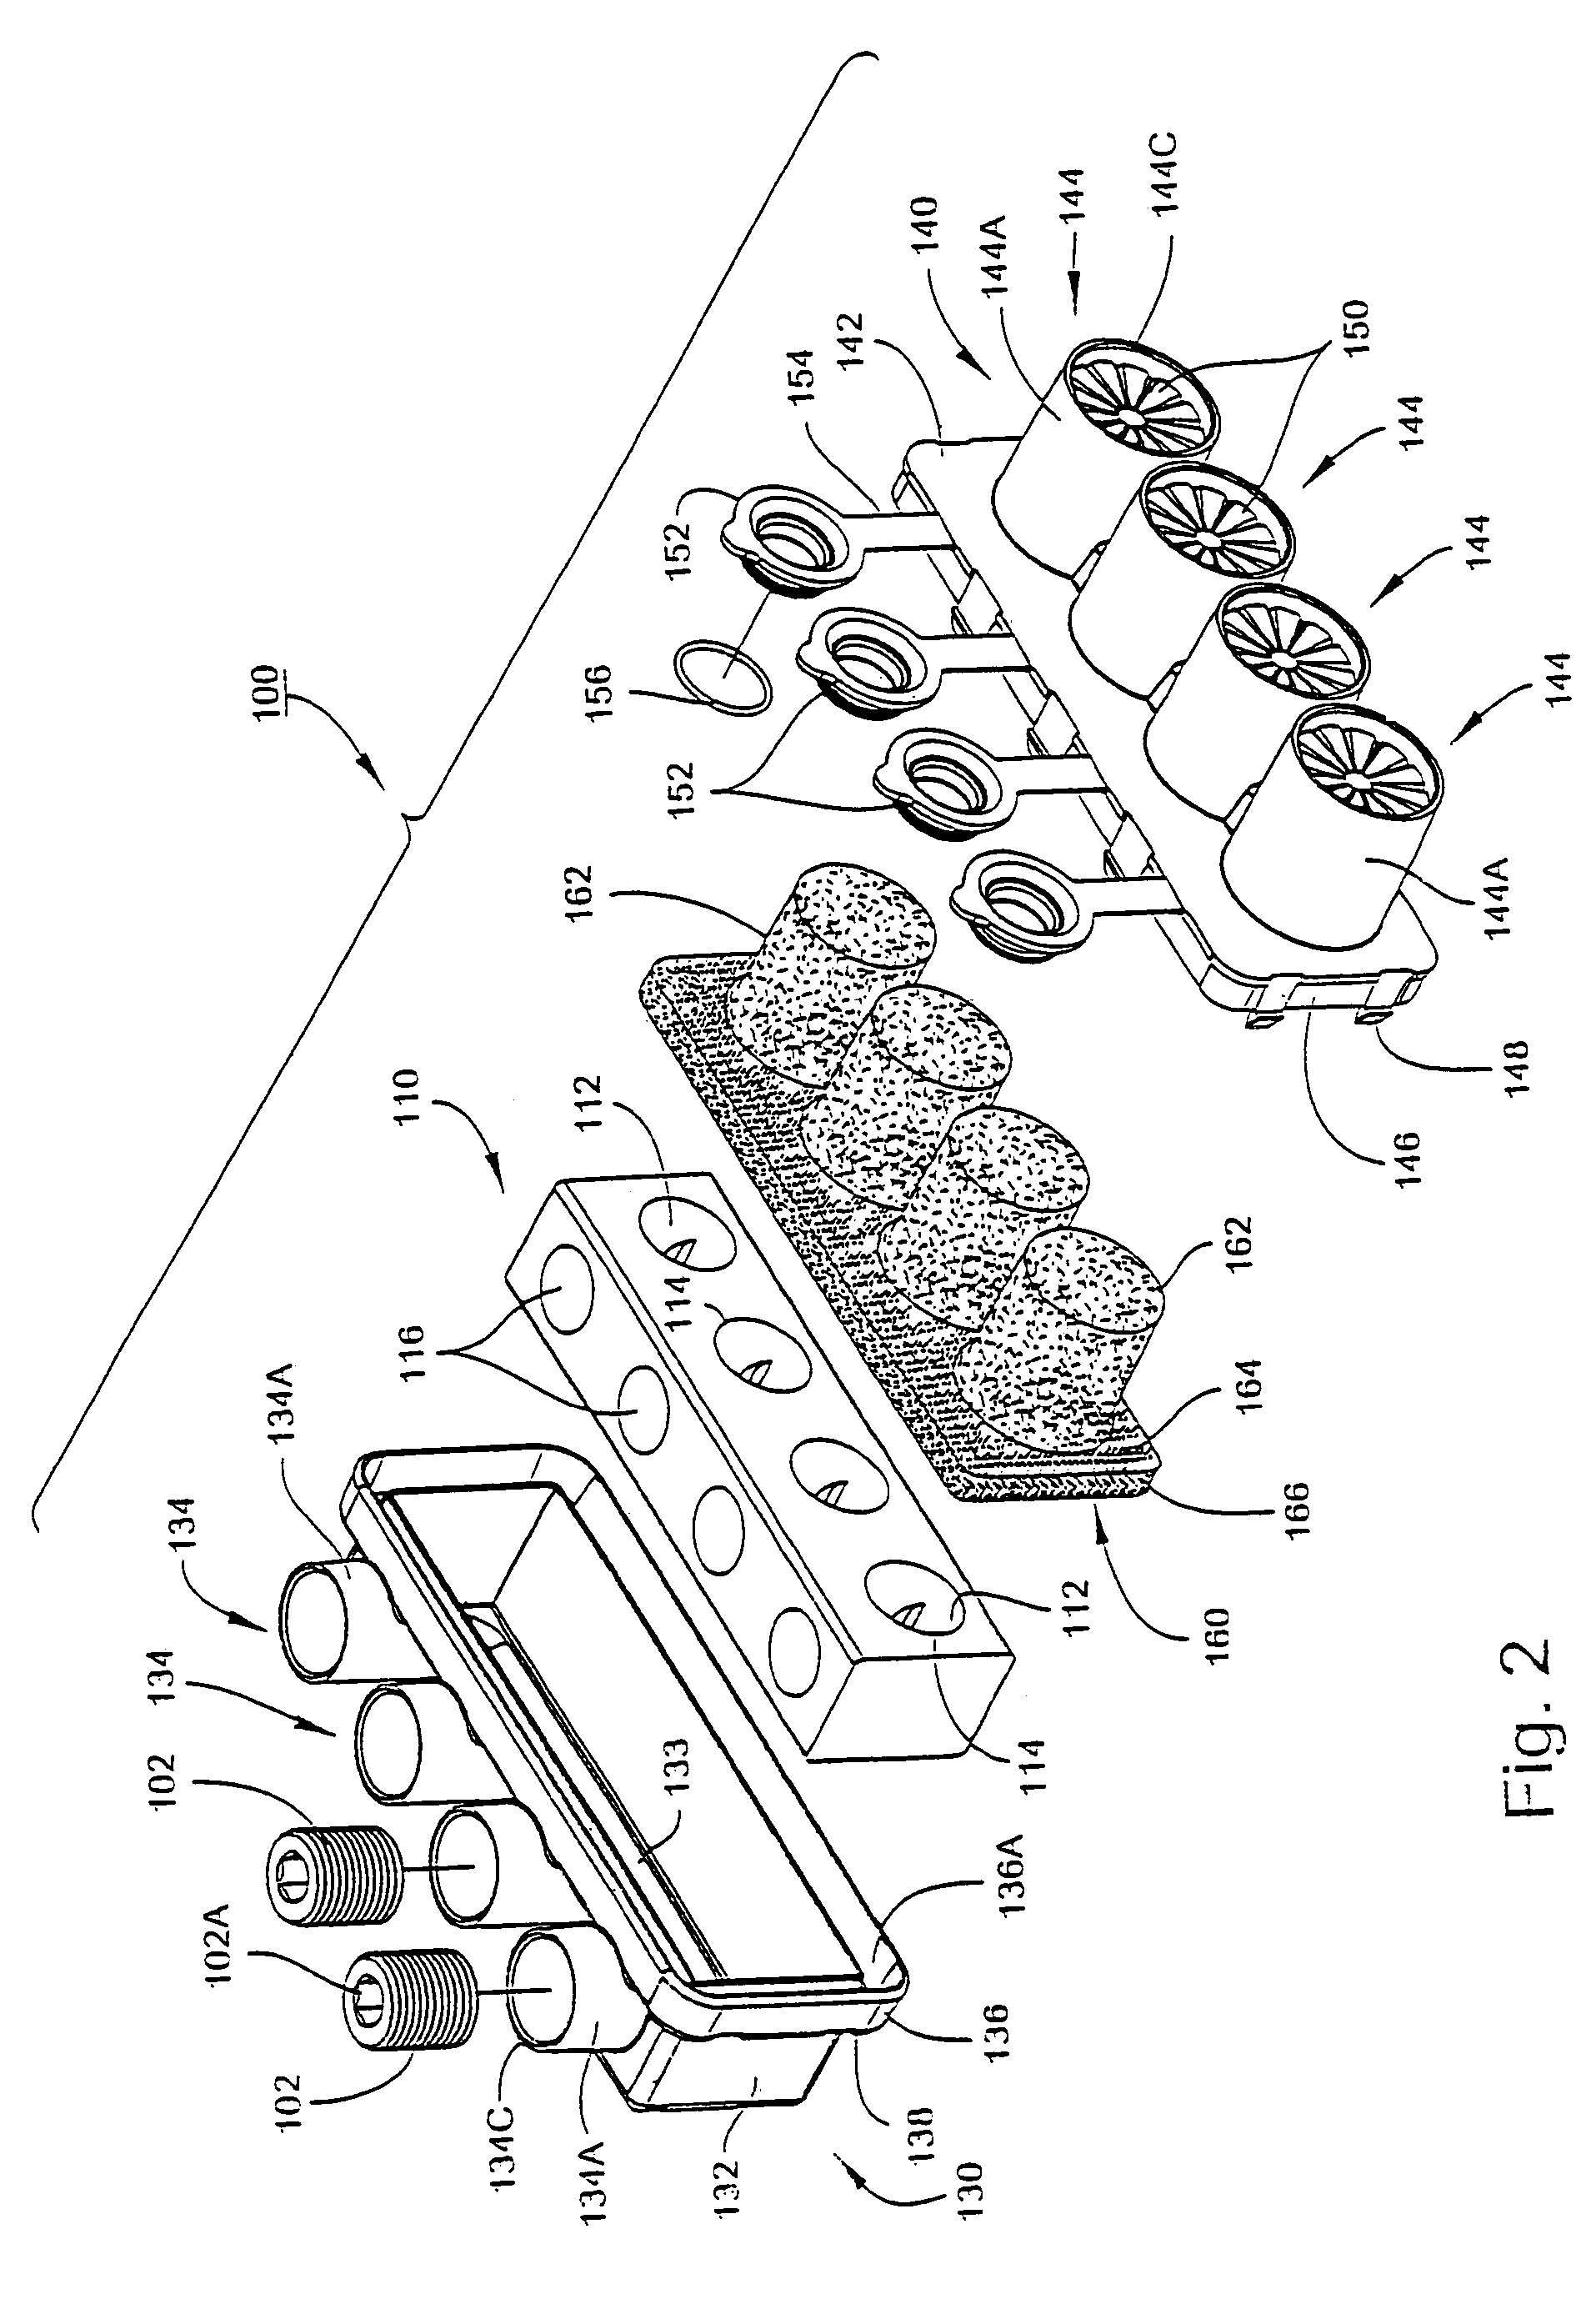 Electrical connectors and methods for using the same